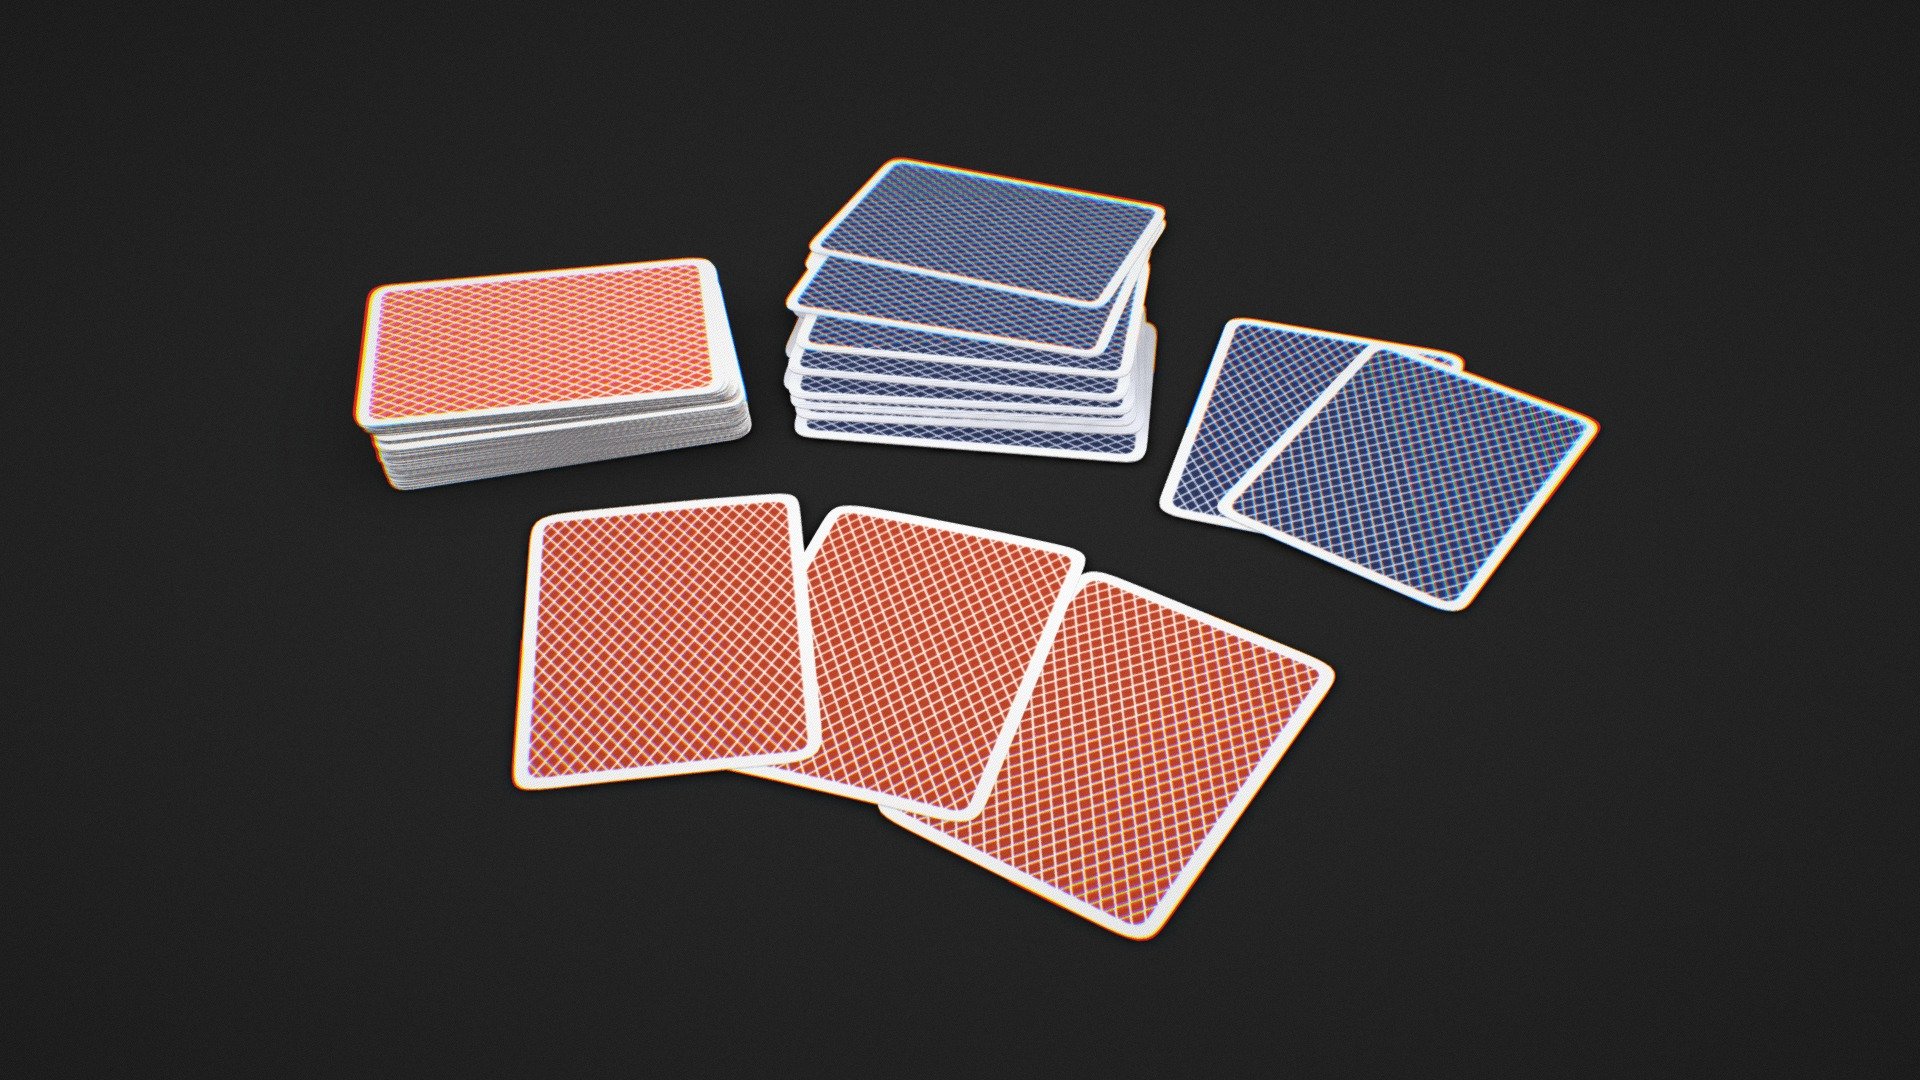 Stacks Of Playing Cards Buy Royalty Free 3d Model By Æon Xaeon [5a95361] Sketchfab Store